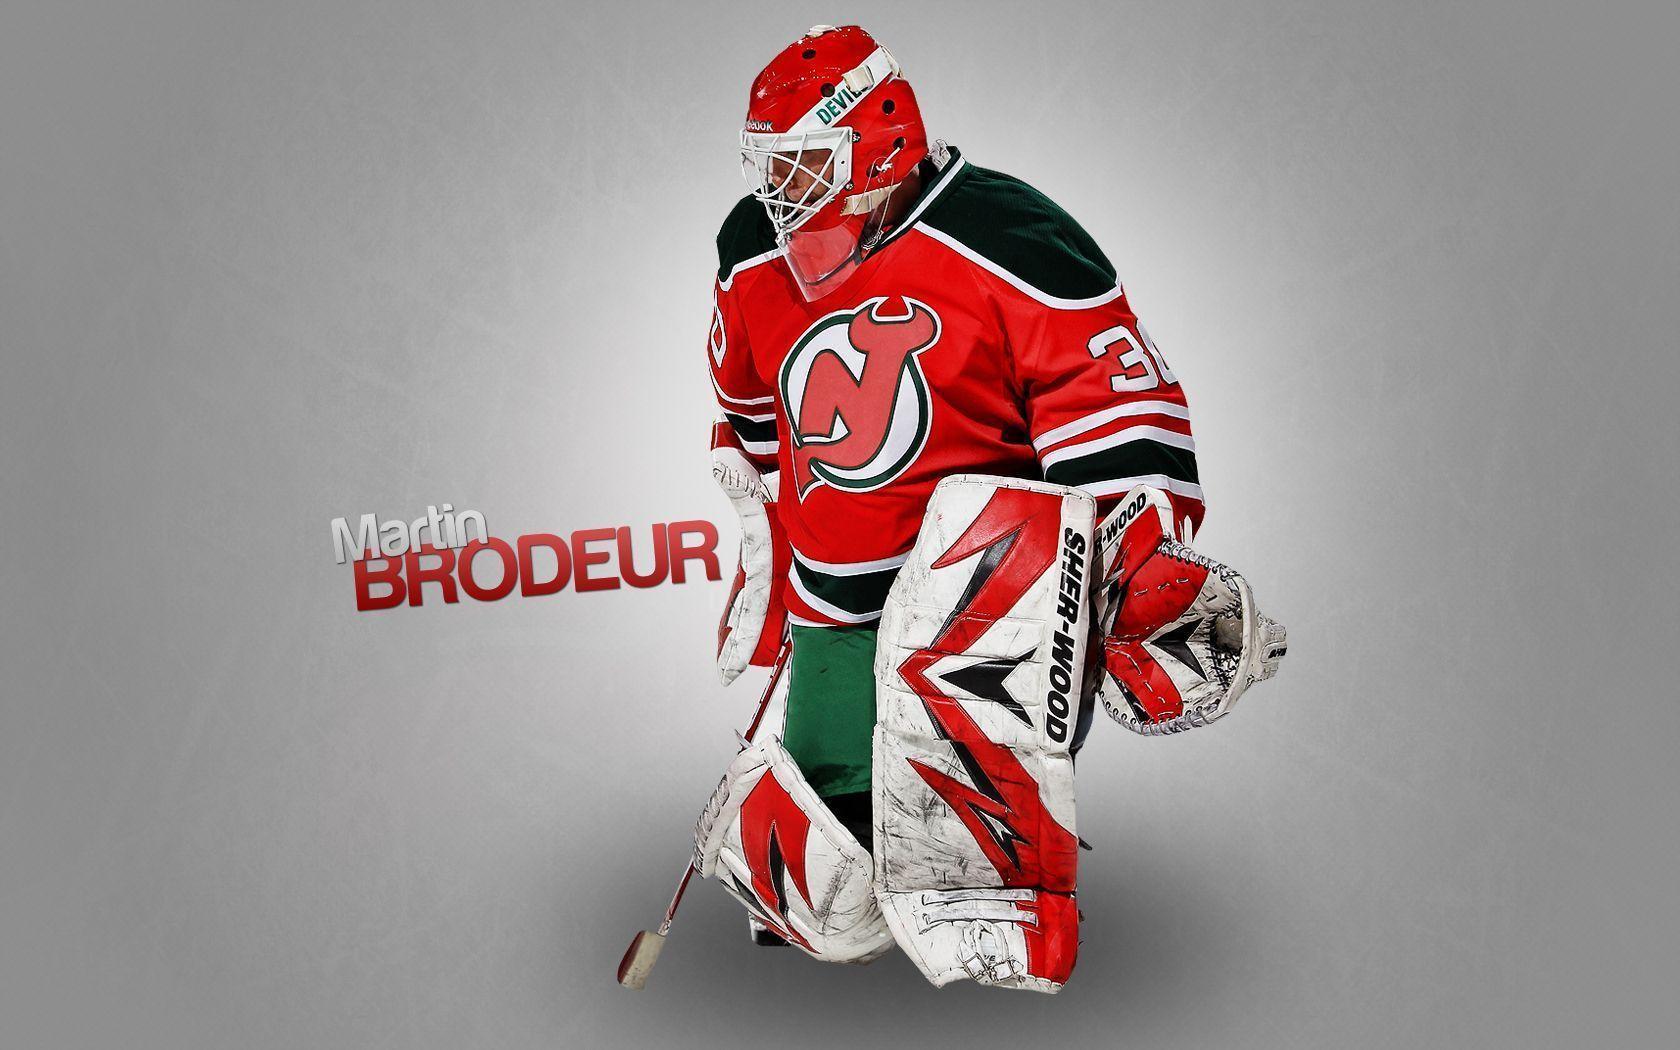 Download New Jersey Devils Green And Red Wallpaper